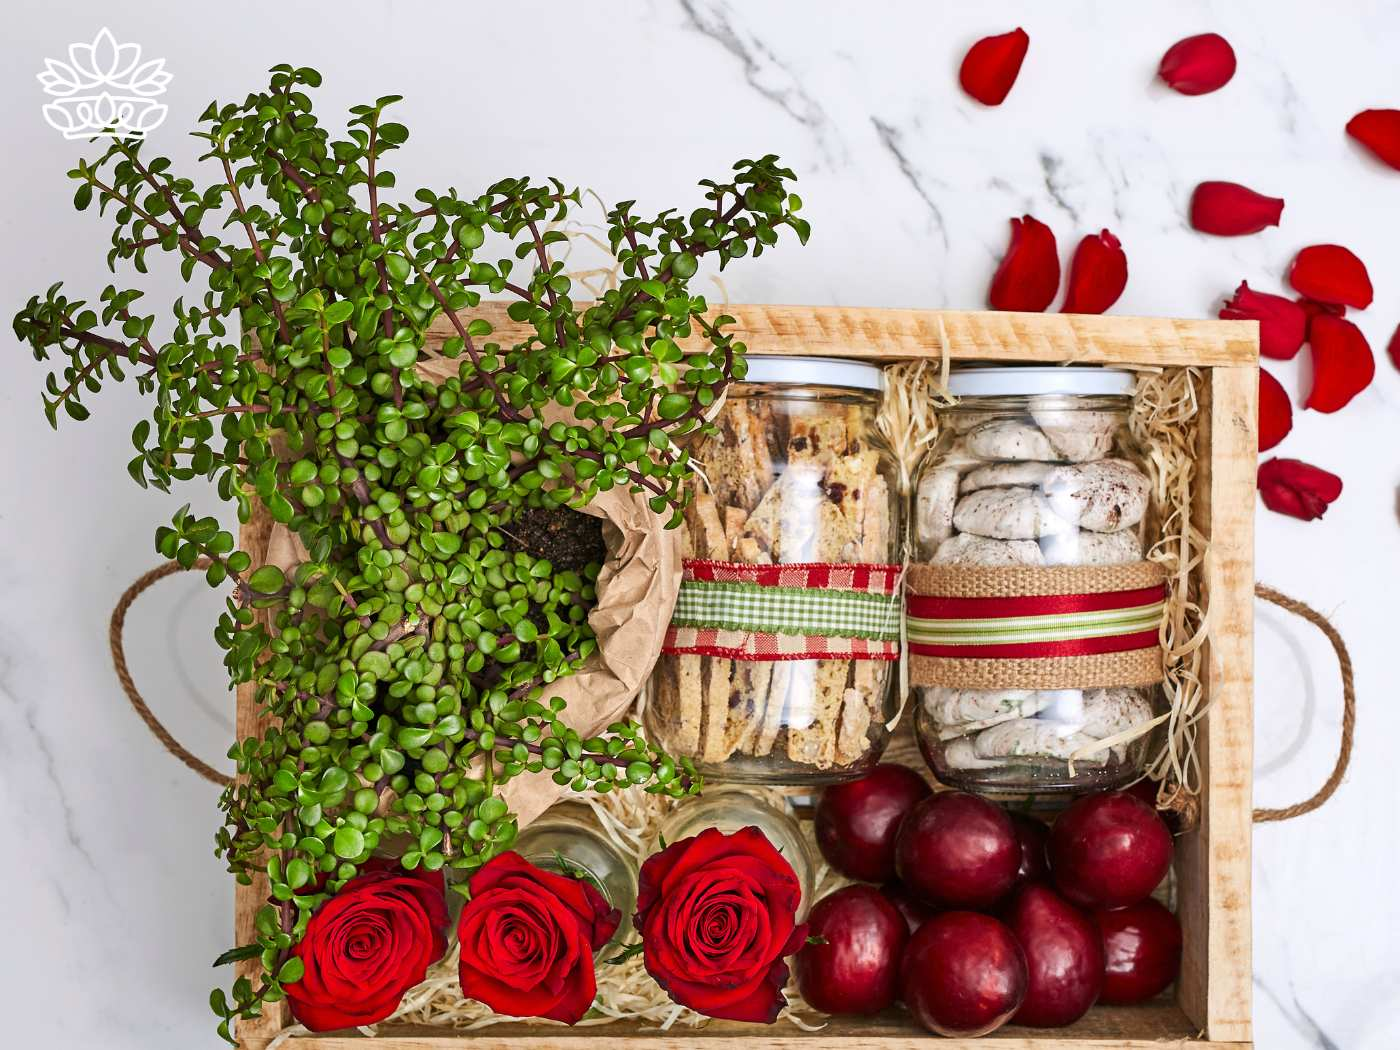 A beautifully curated gift basket from Fabulous Flowers and Gifts, featuring vibrant red roses, fresh red apples, a lush green potted plant, and jars filled with assorted cookies and sweets, perfect for a heartfelt graduation gift.